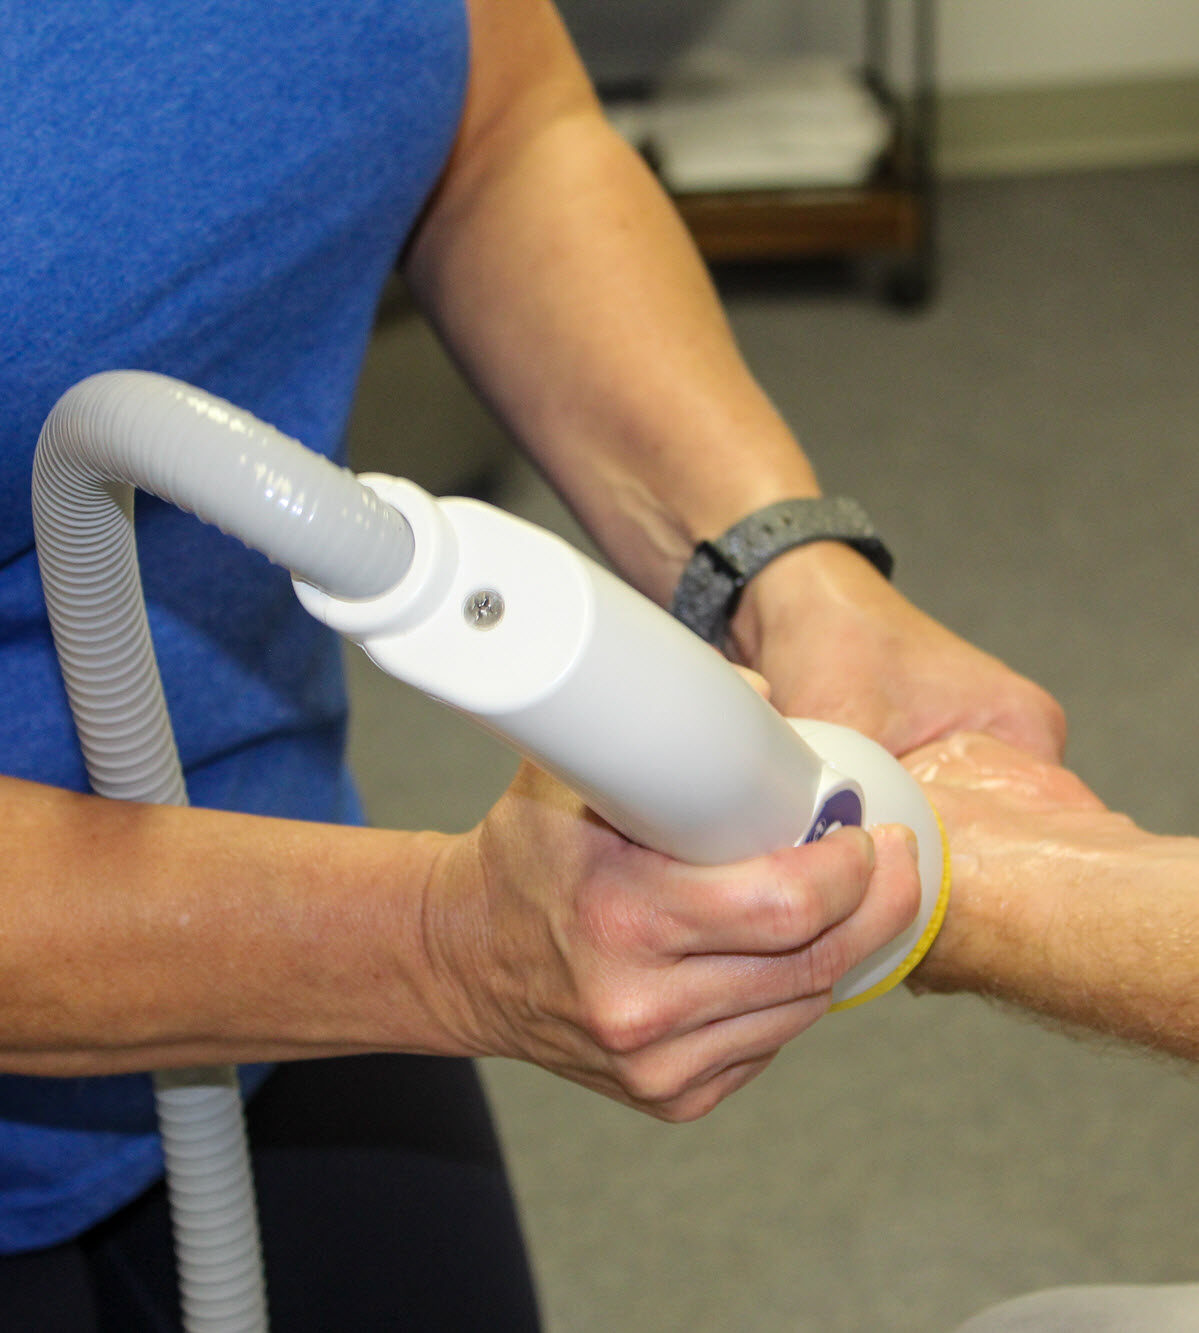 Picture of a person receiving SoftWave Therapy on their left wrist.